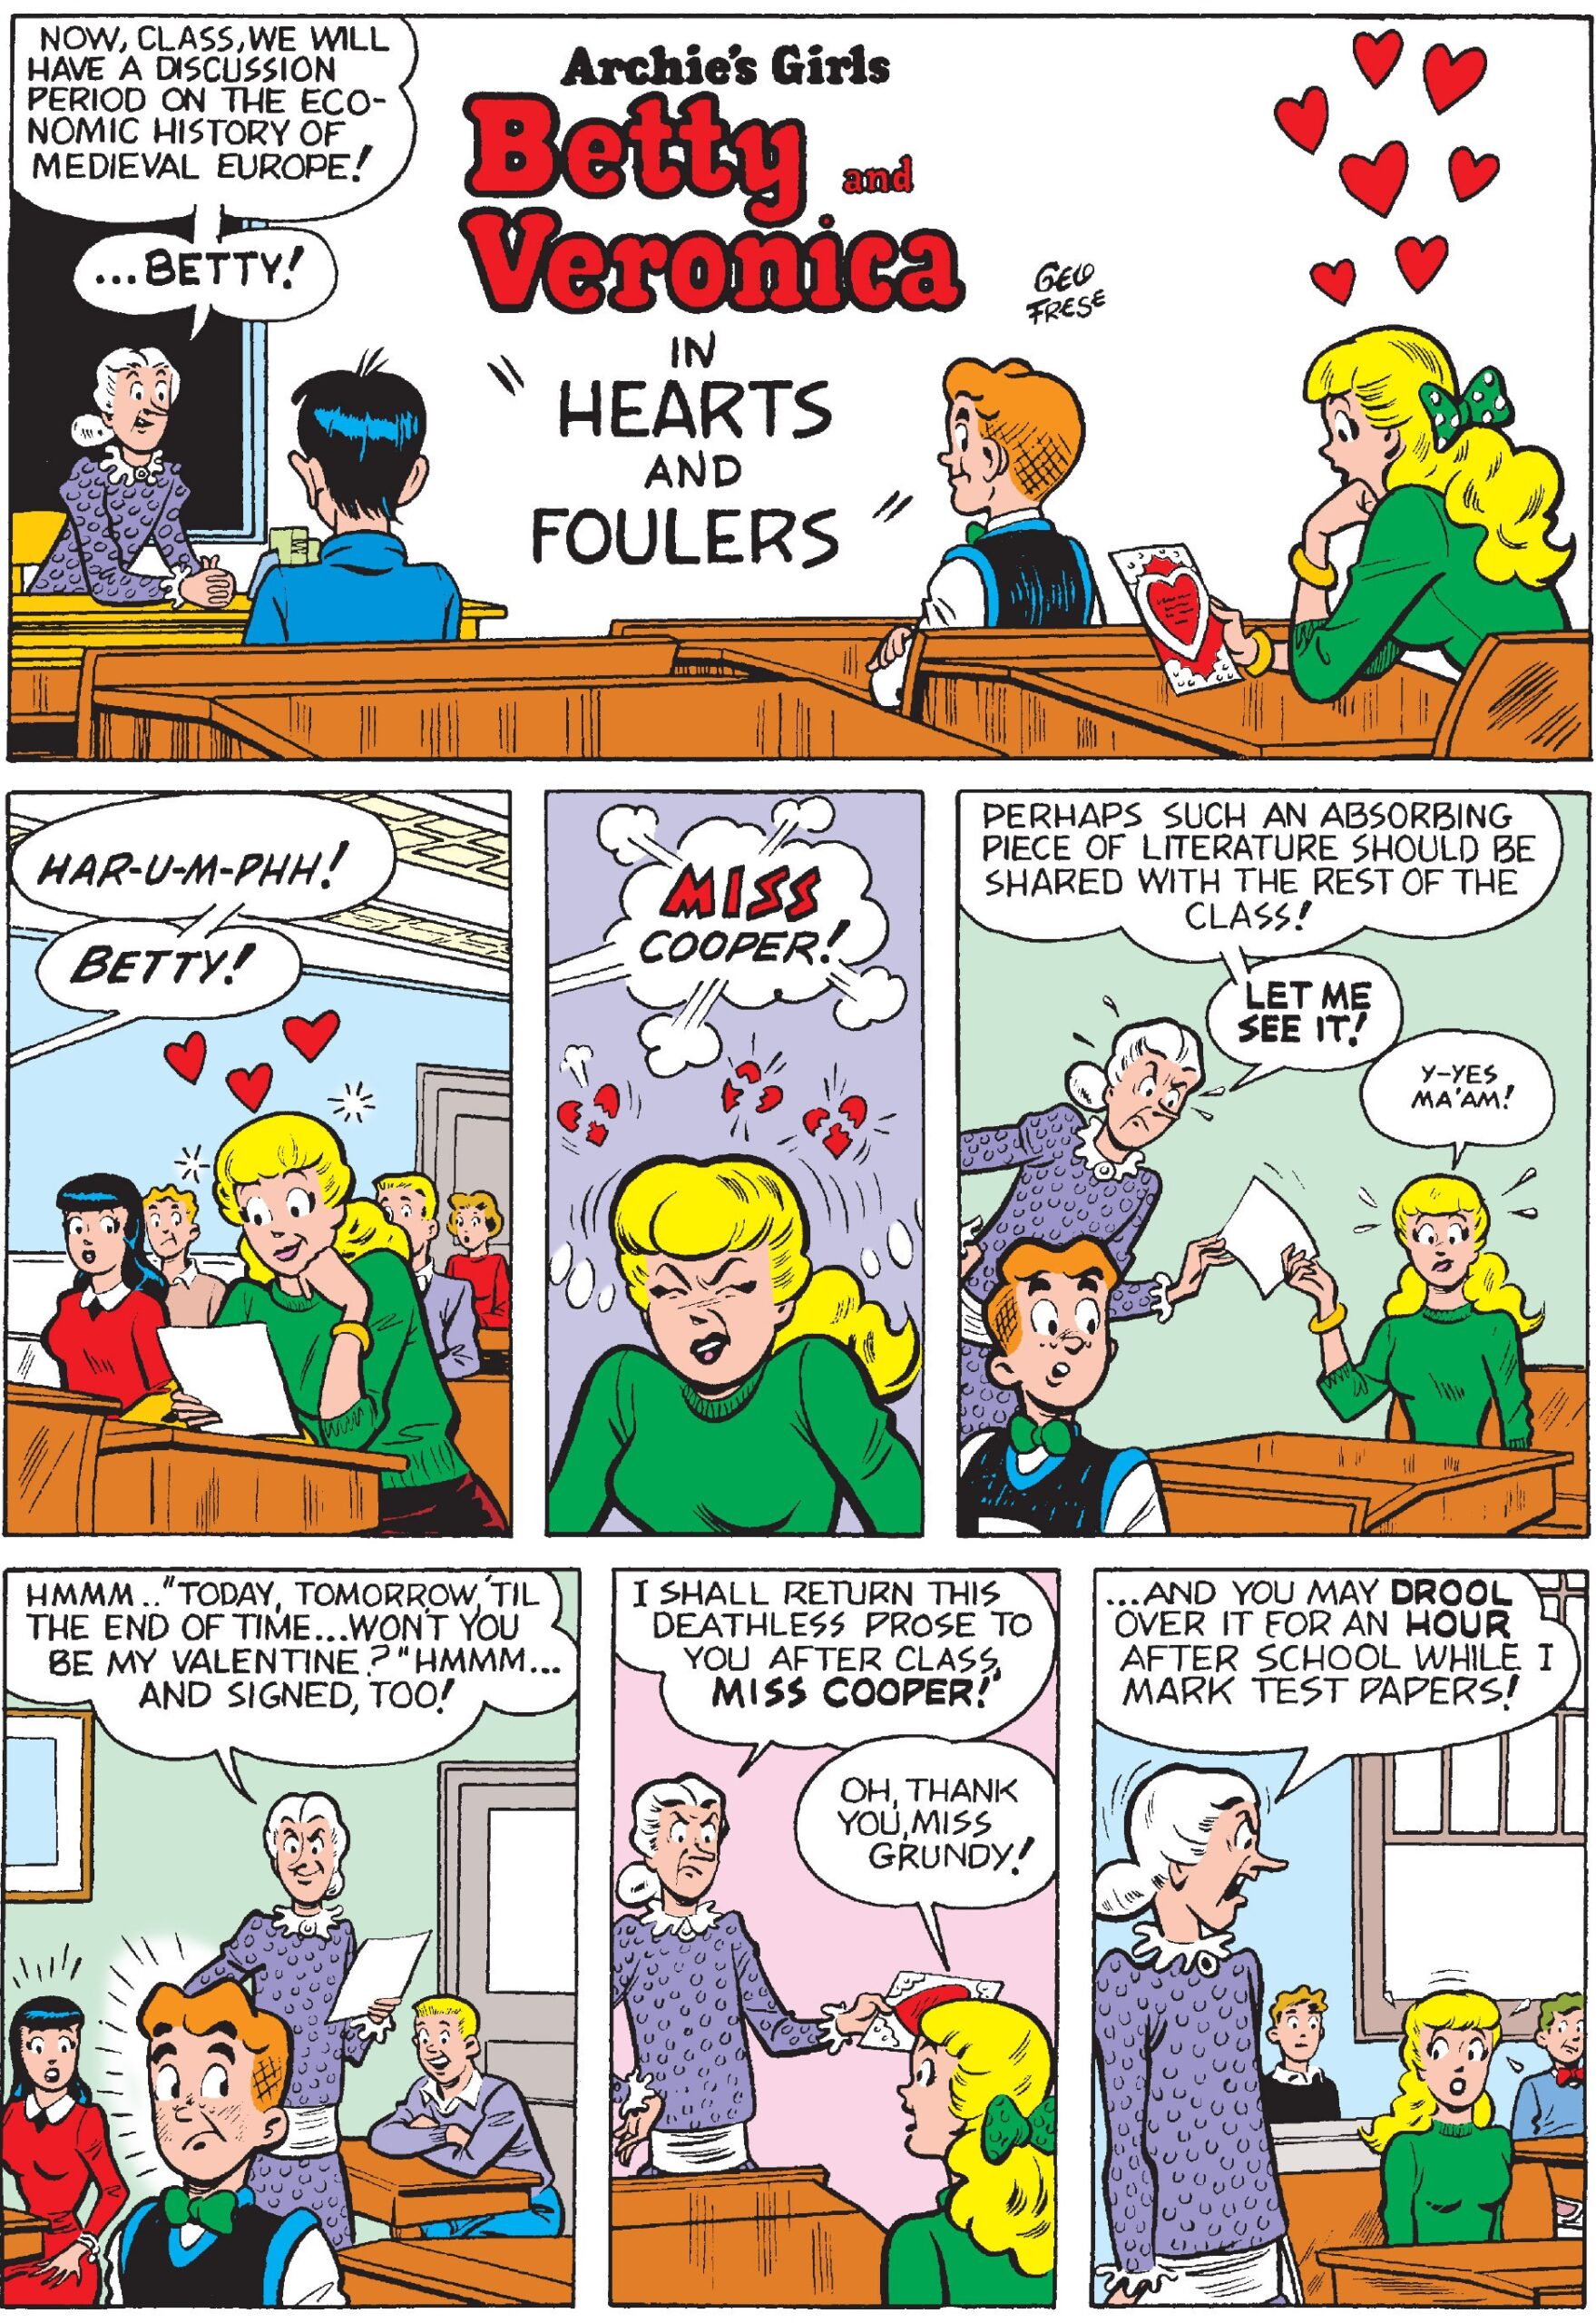 Archie gives Betty a Valentine